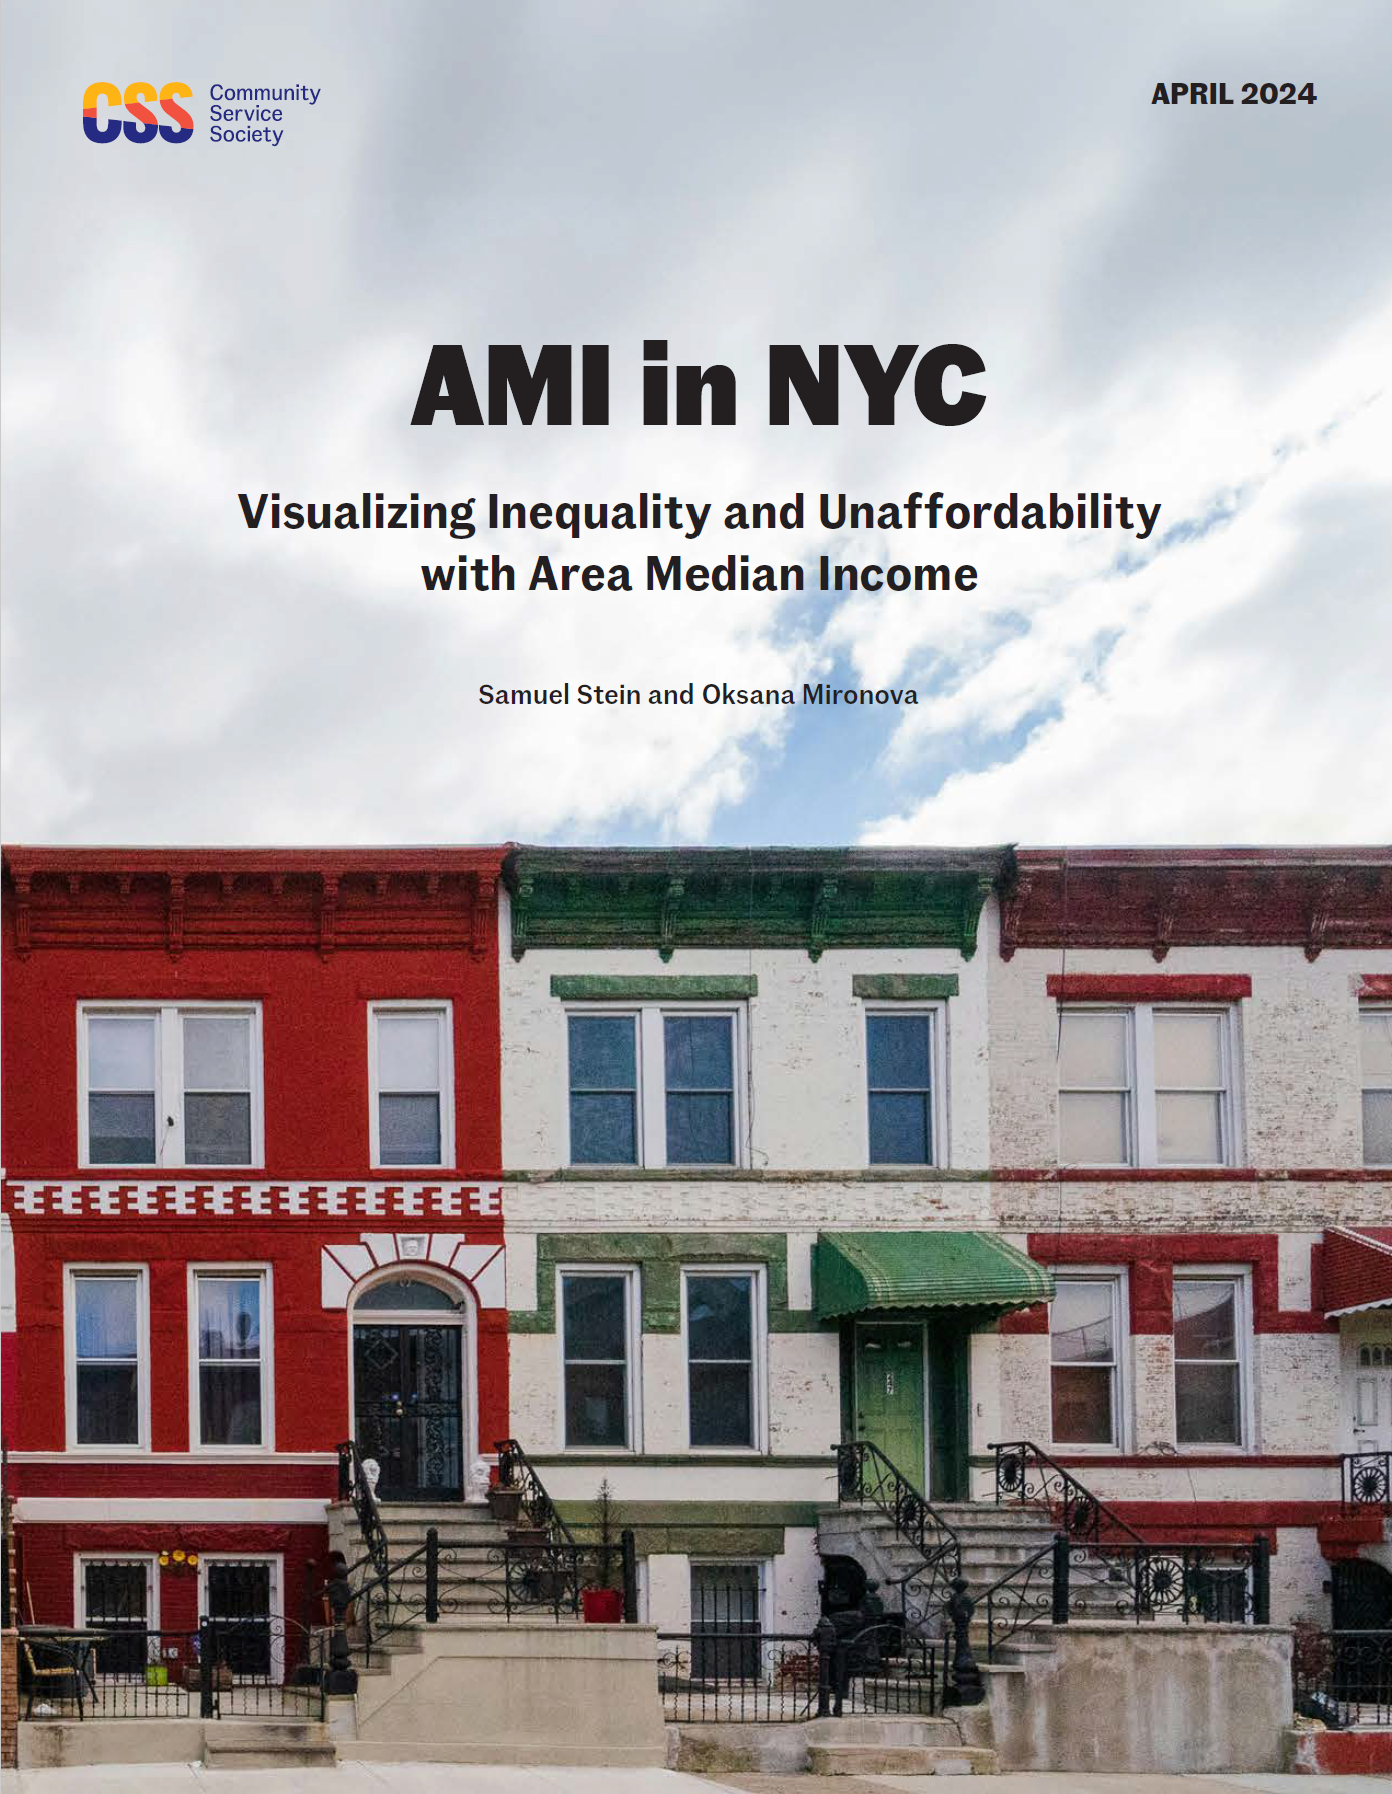 AMI in NYC: Visualizing Inequality and Unaffordability with Area Median Income